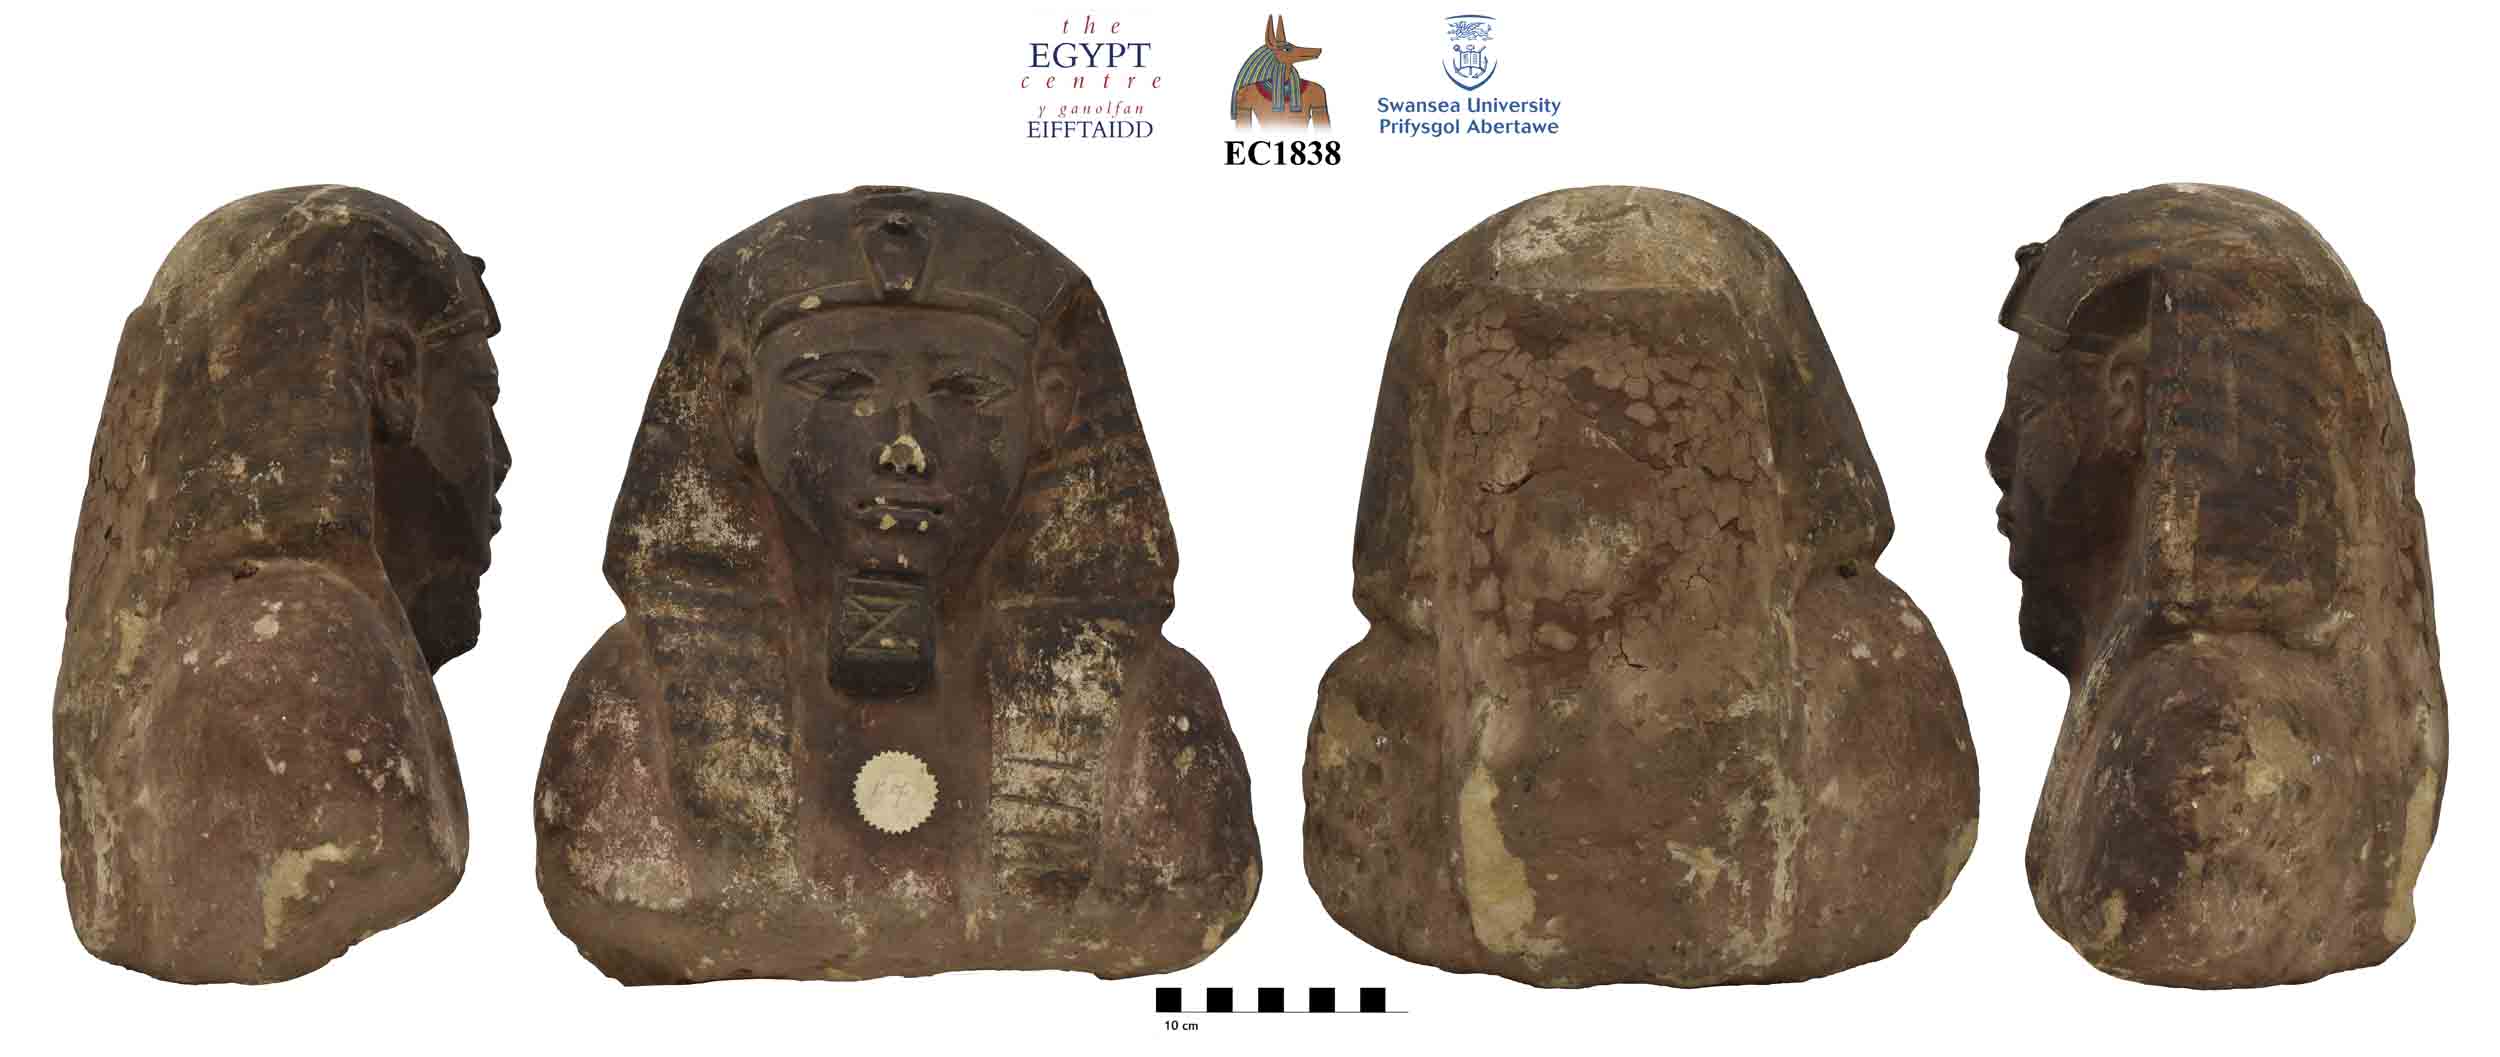 Image for: Bust of a king